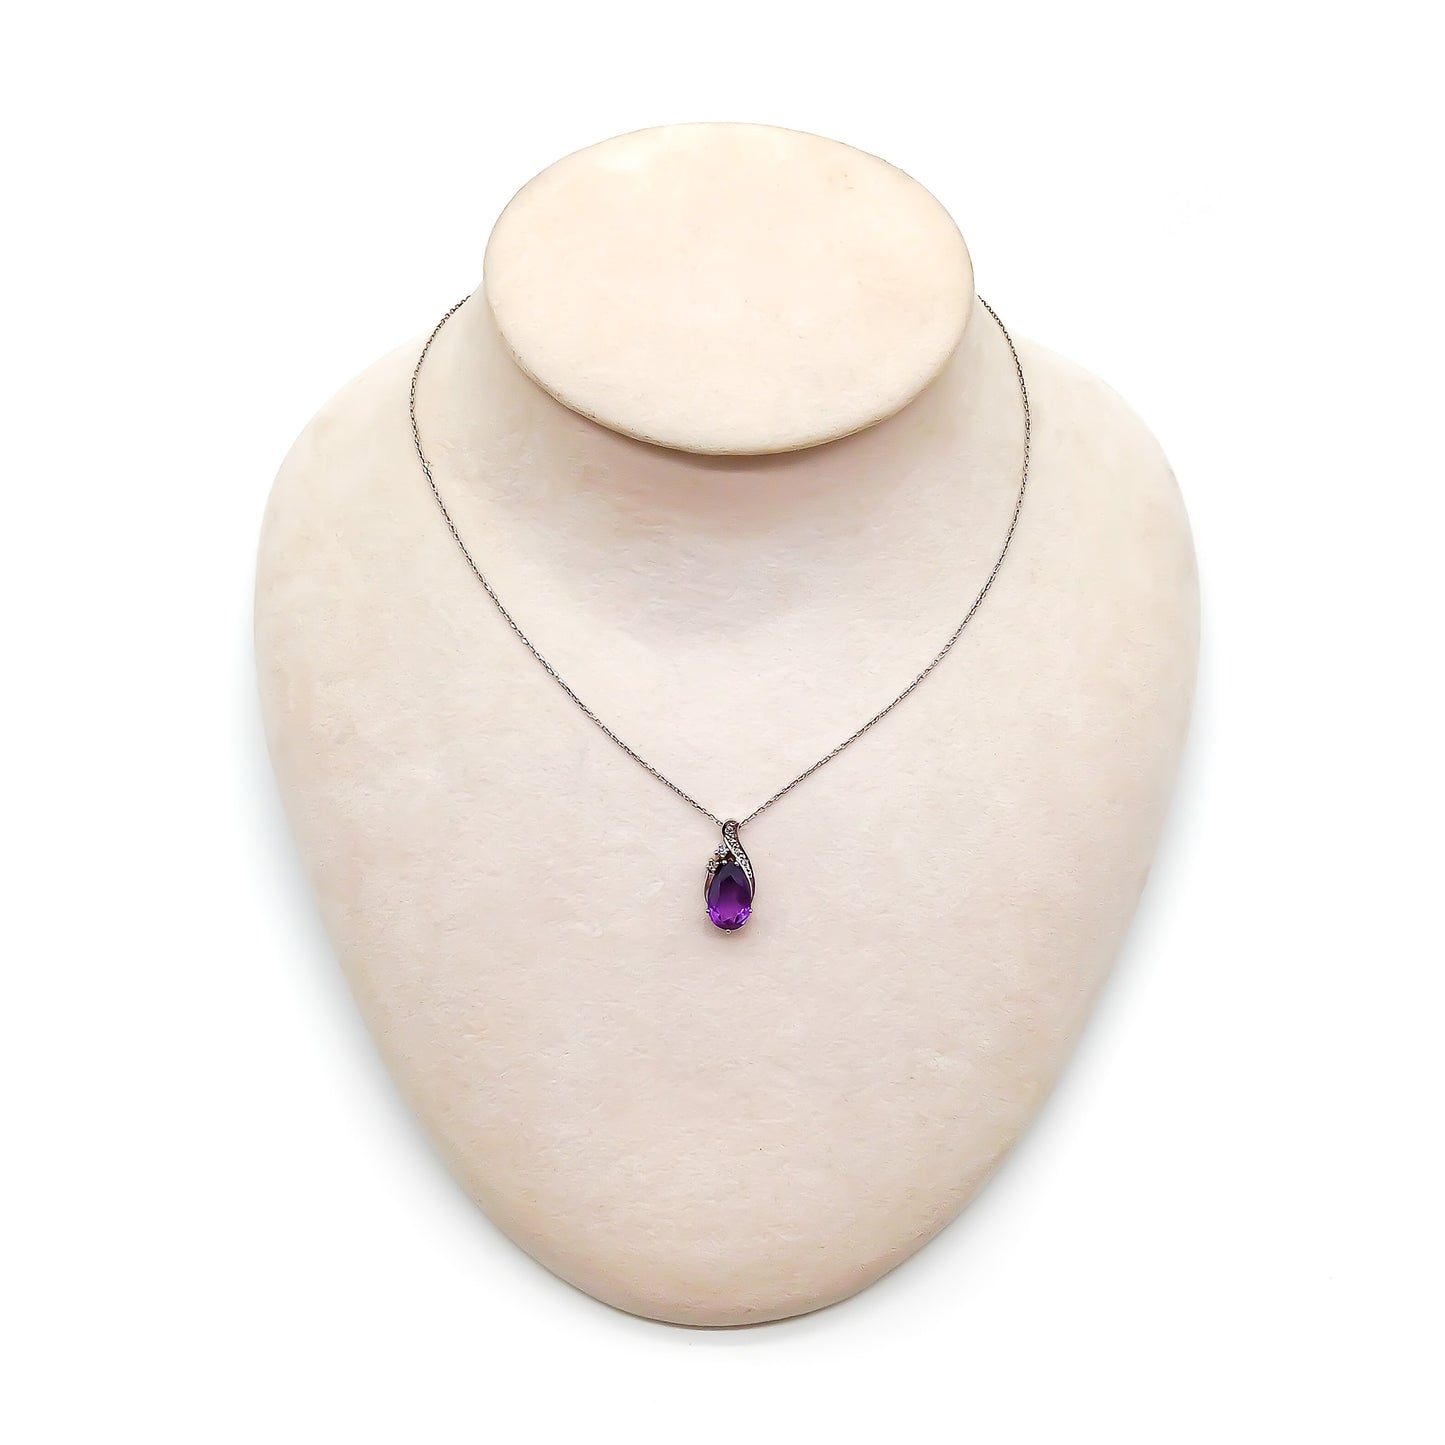 Dainty 18ct white gold diamond pendant set with a deep purple pear-cut amethyst on an 18ct white gold chain.